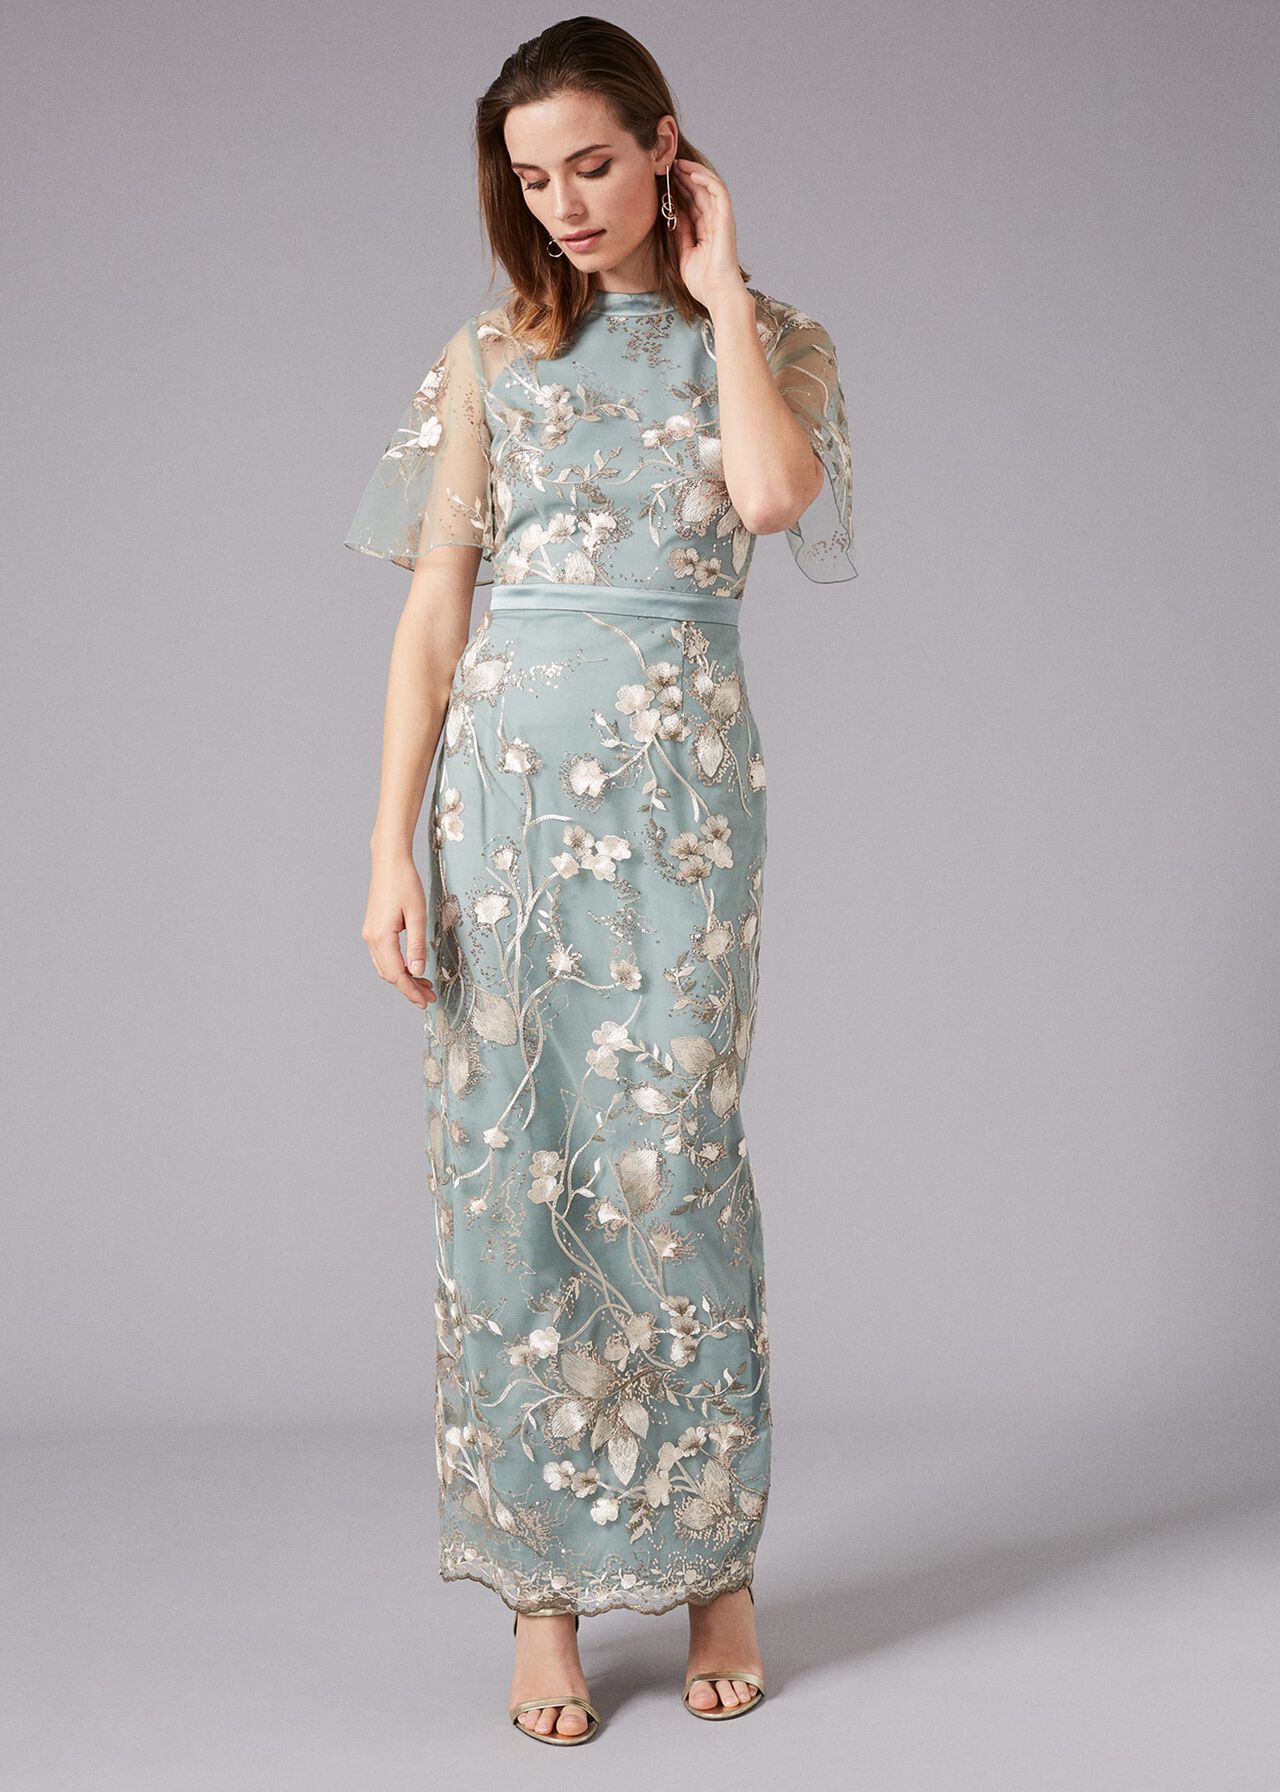 Glenda Floral Embroidered Maxi Dress | Phase Eight